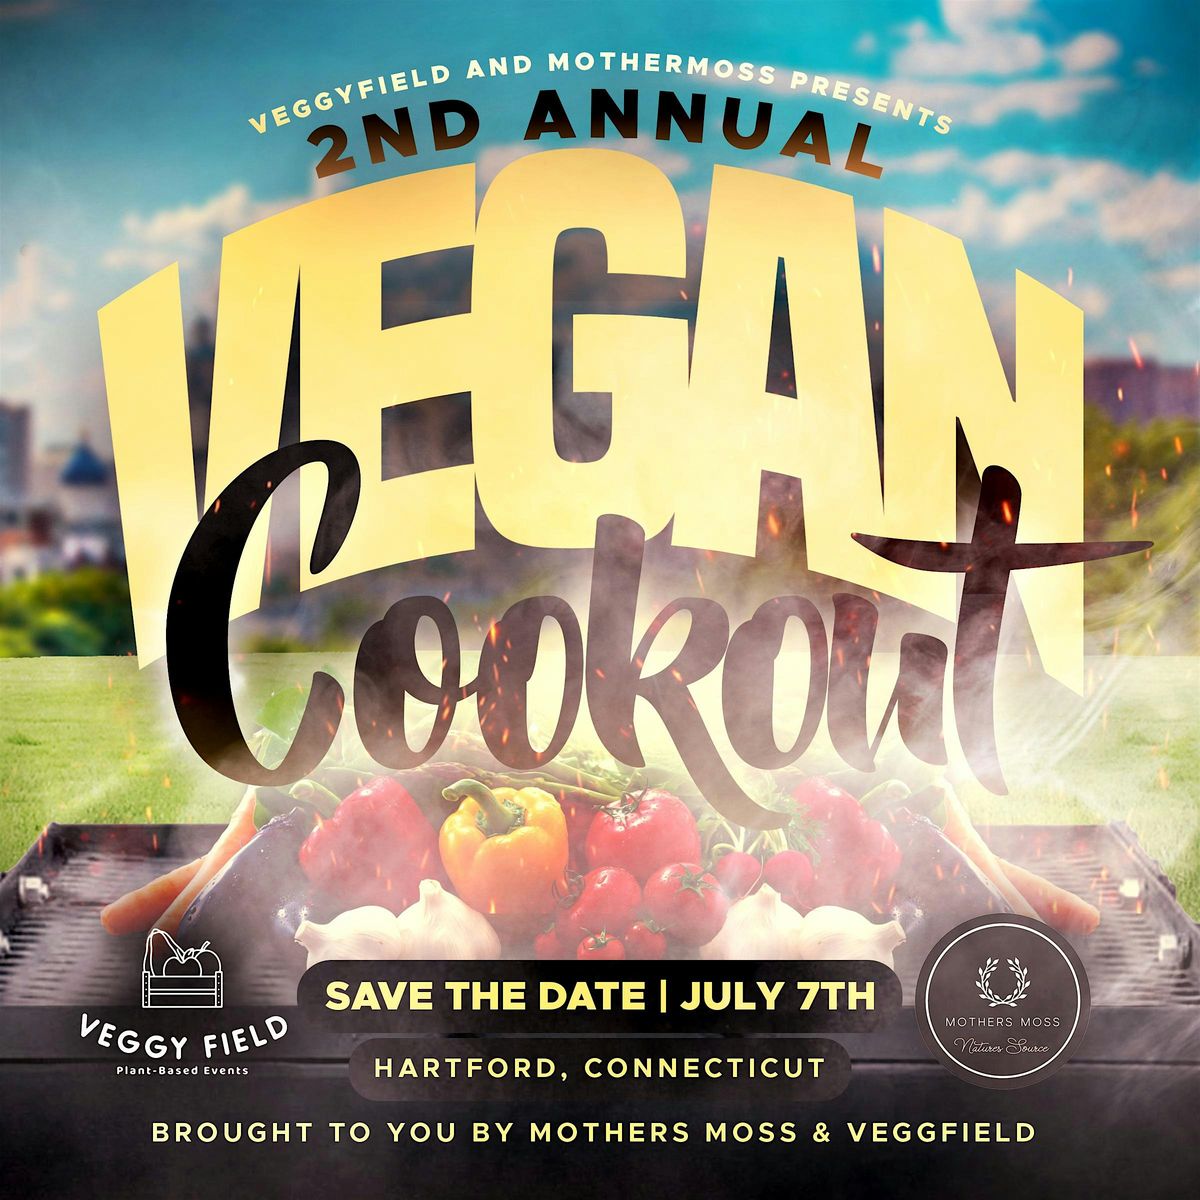 2nd Annual Vegan Cookout